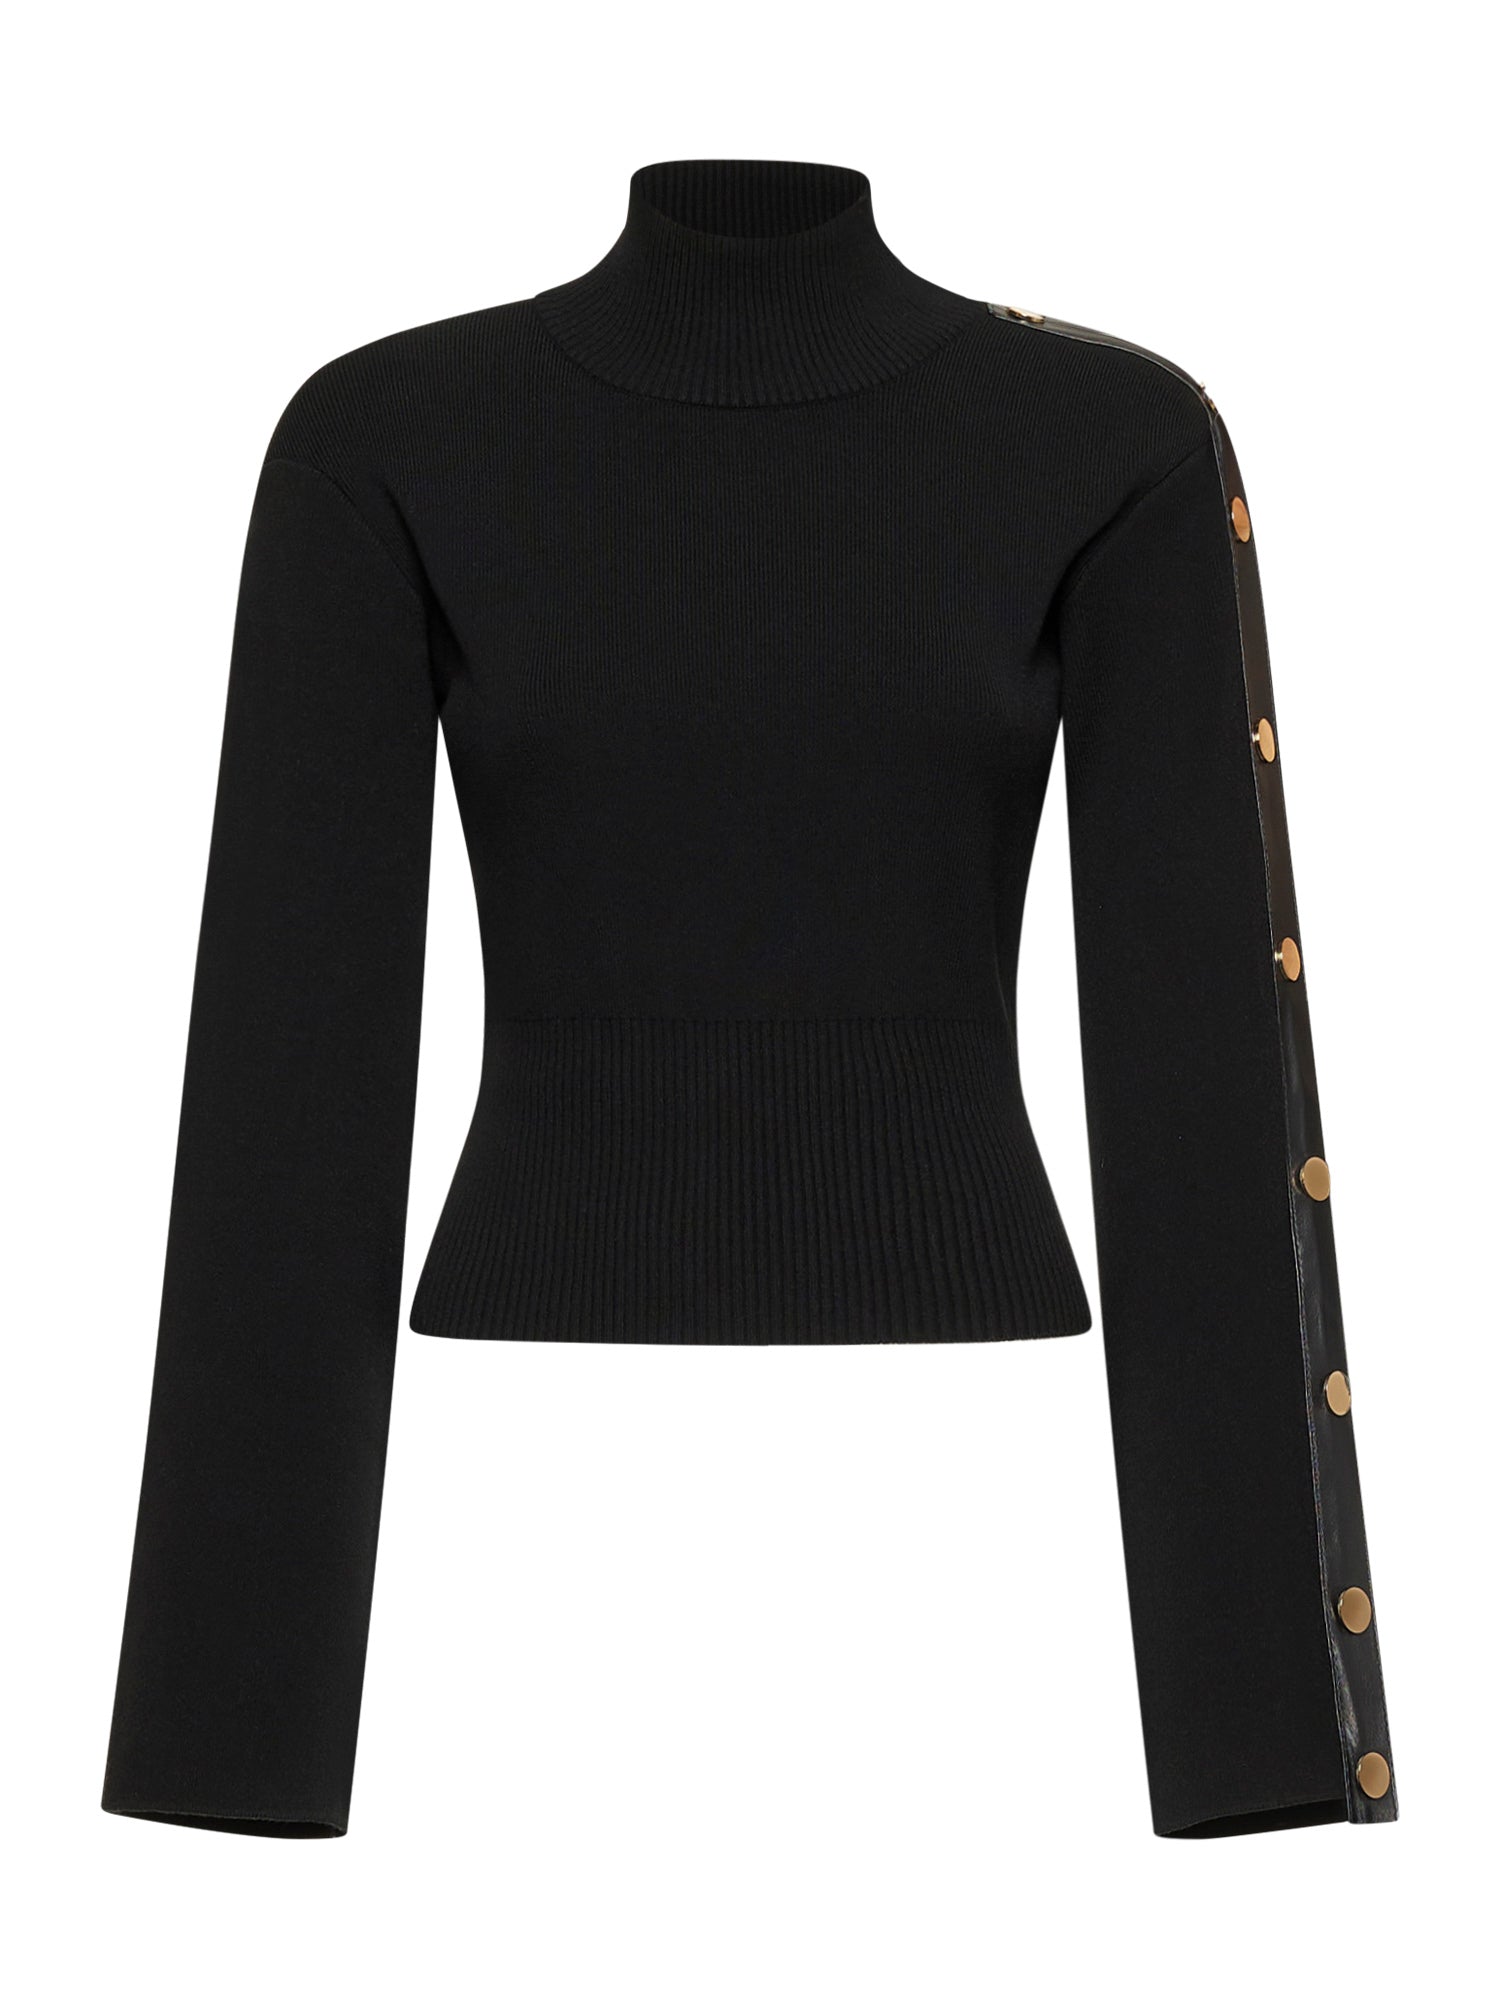 Techno viscose turtleneck and faux leather insert